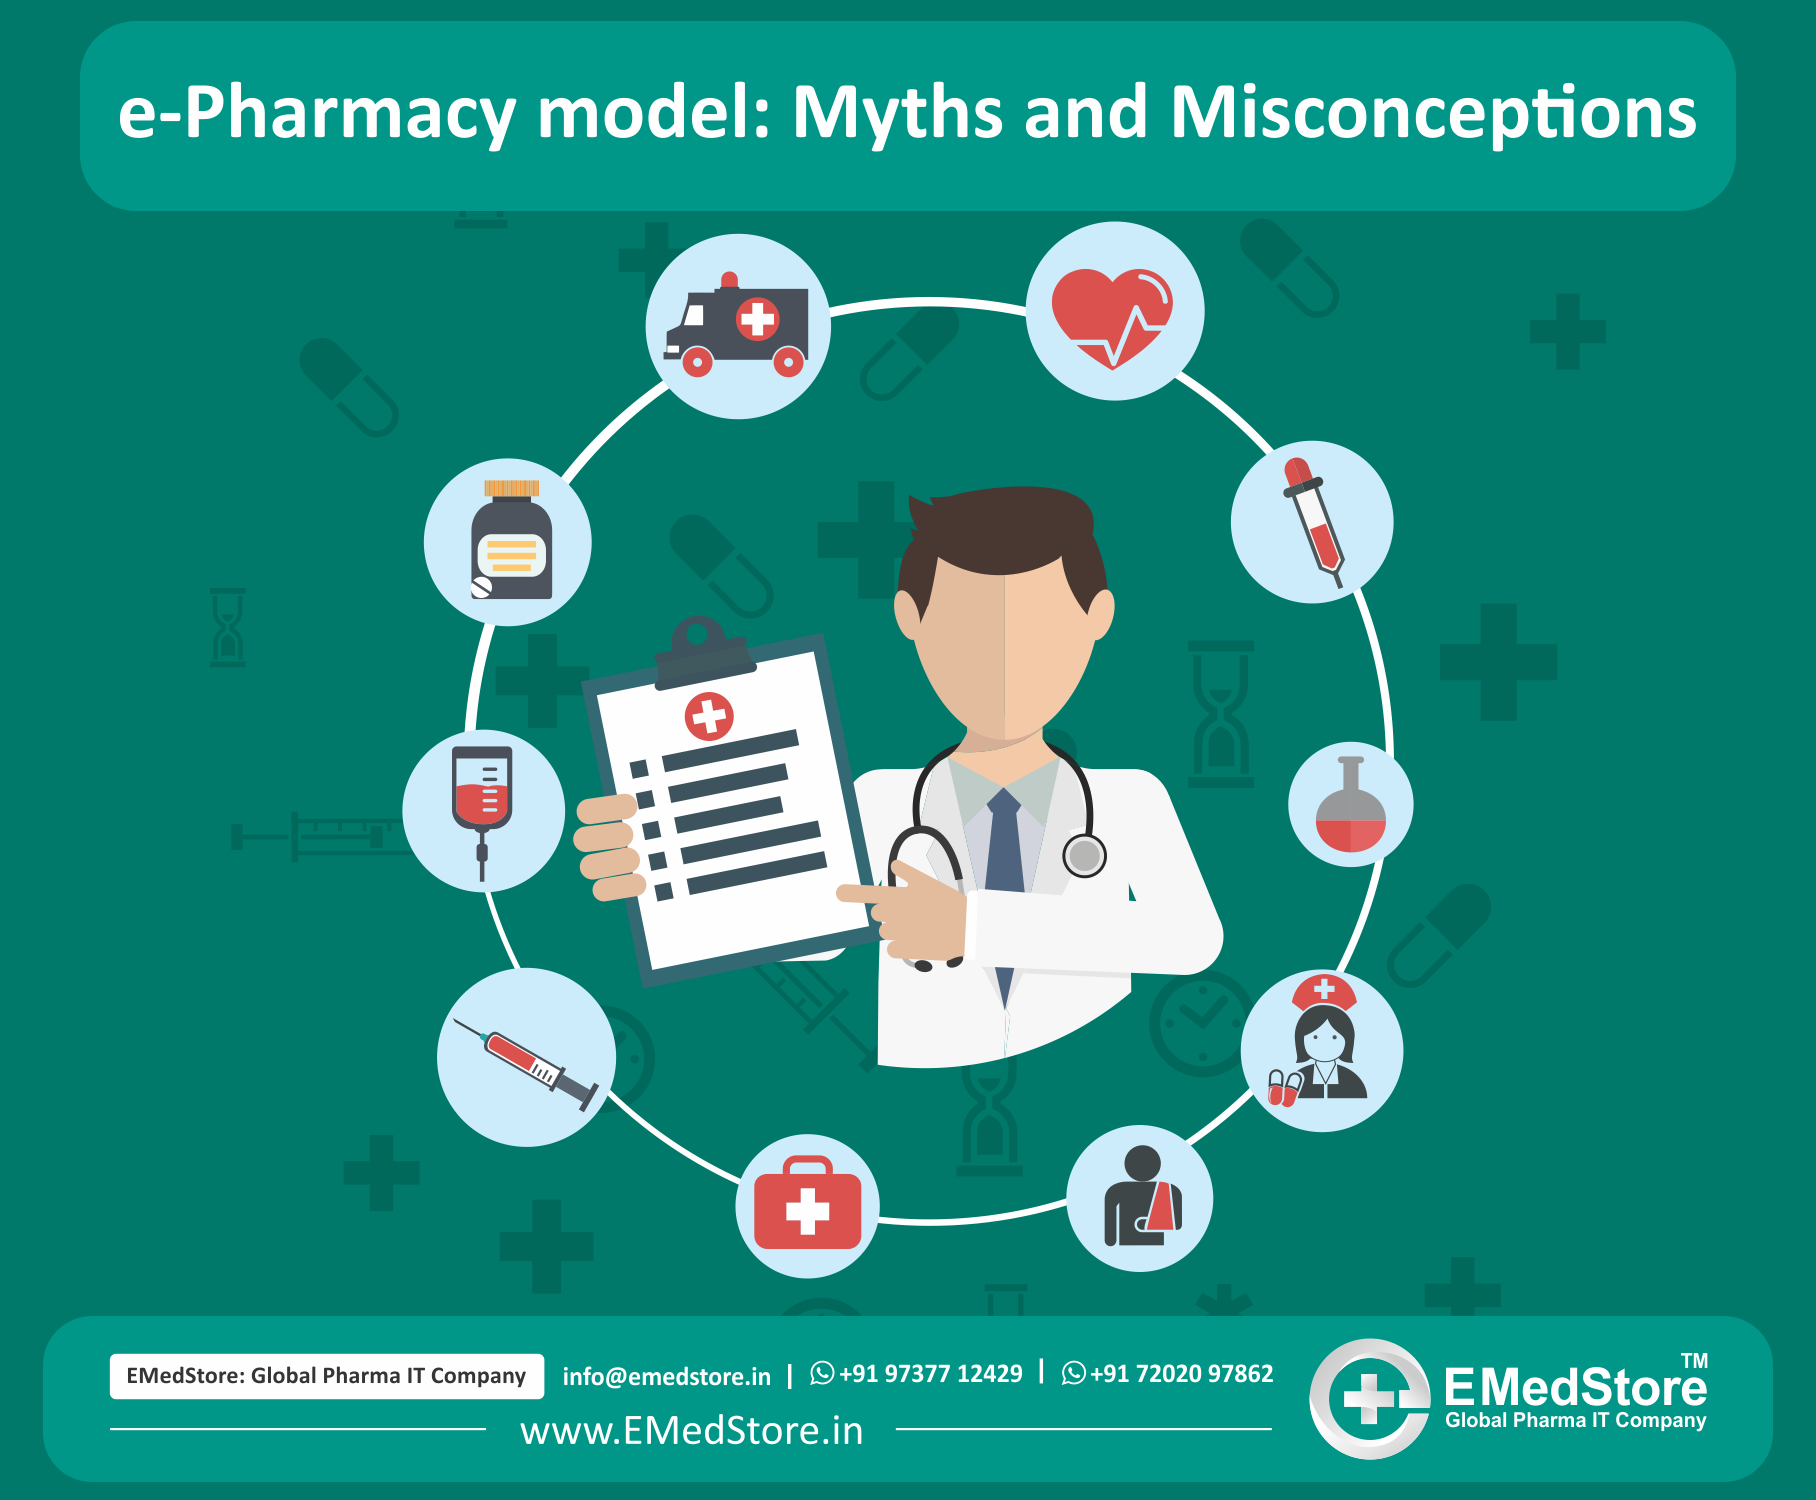 e-Pharmacy model: Myths and Misconceptions